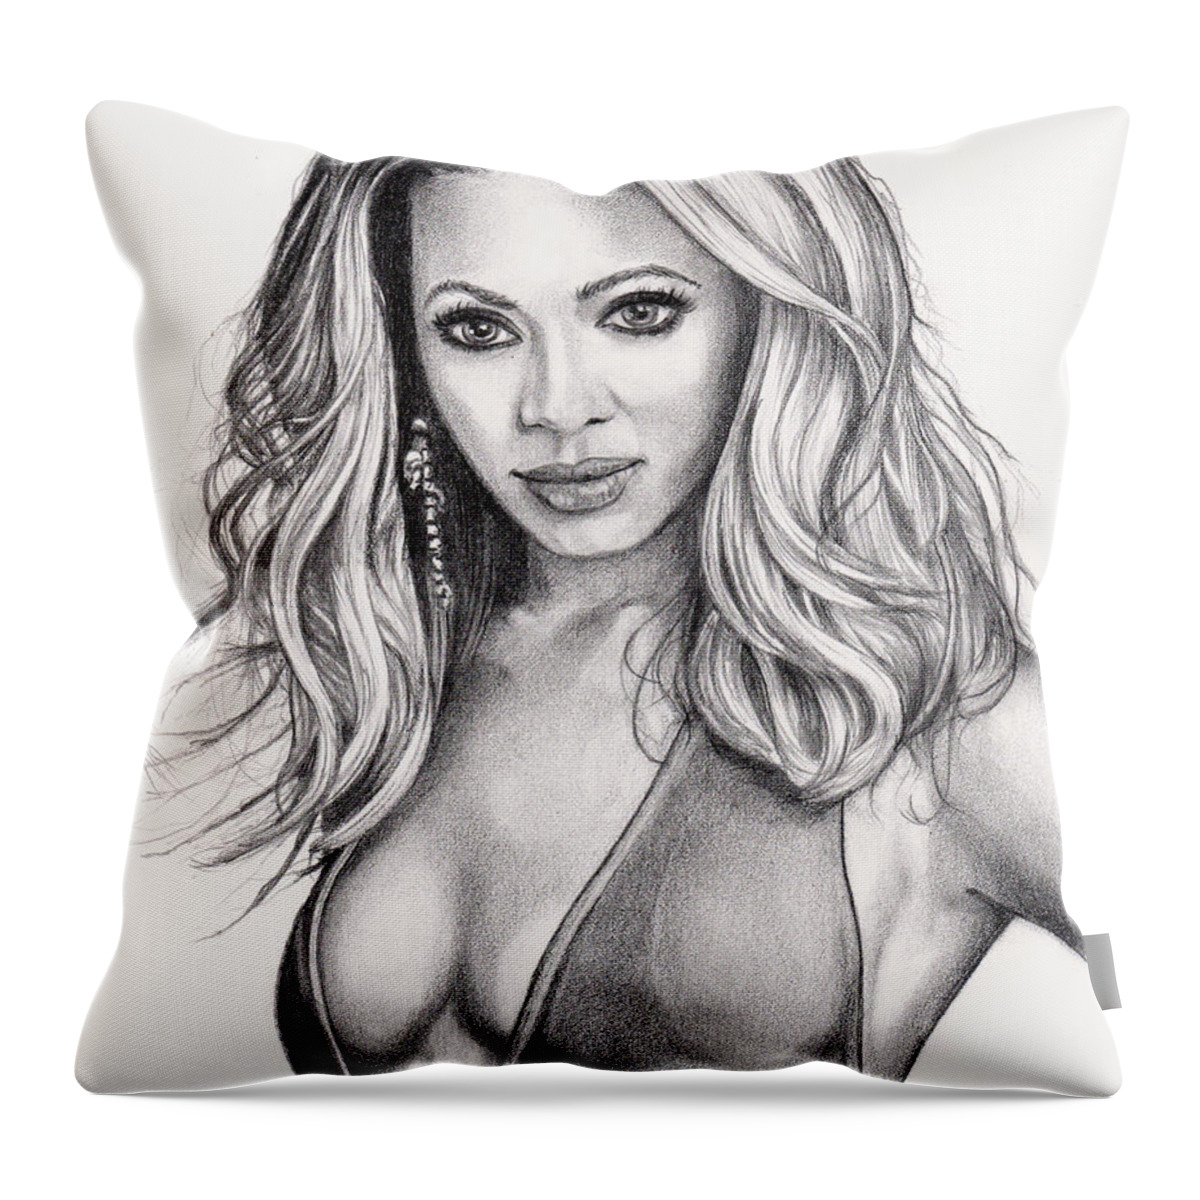 Portraits Throw Pillow featuring the drawing Beyonce by Daniel Carvalho